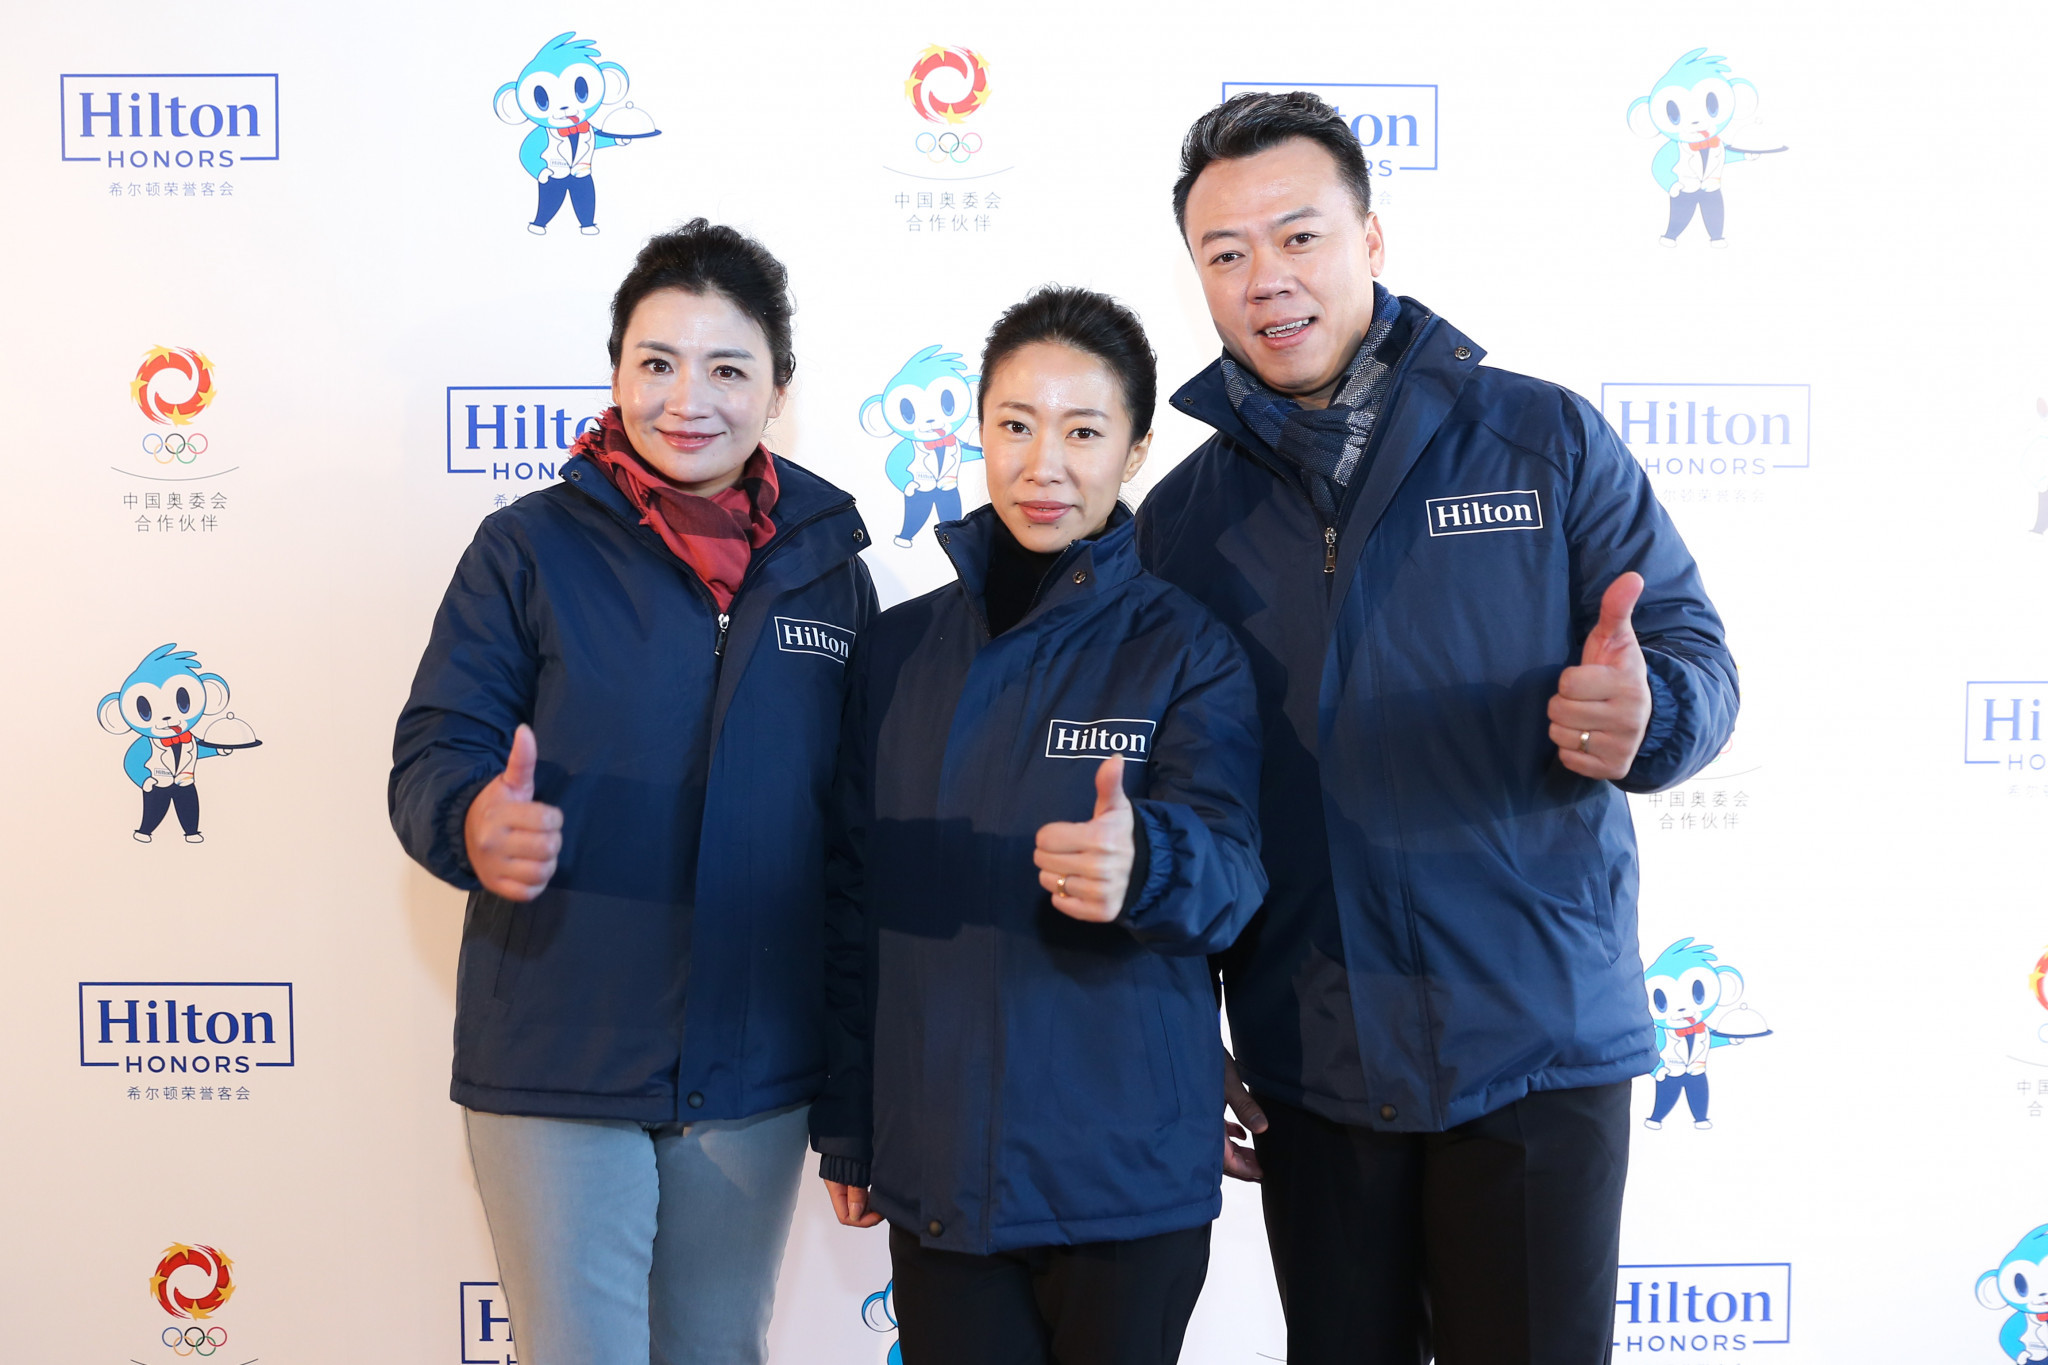 Hilton Hotels have been supporting China House since London 2012 ©Hilton Hotels